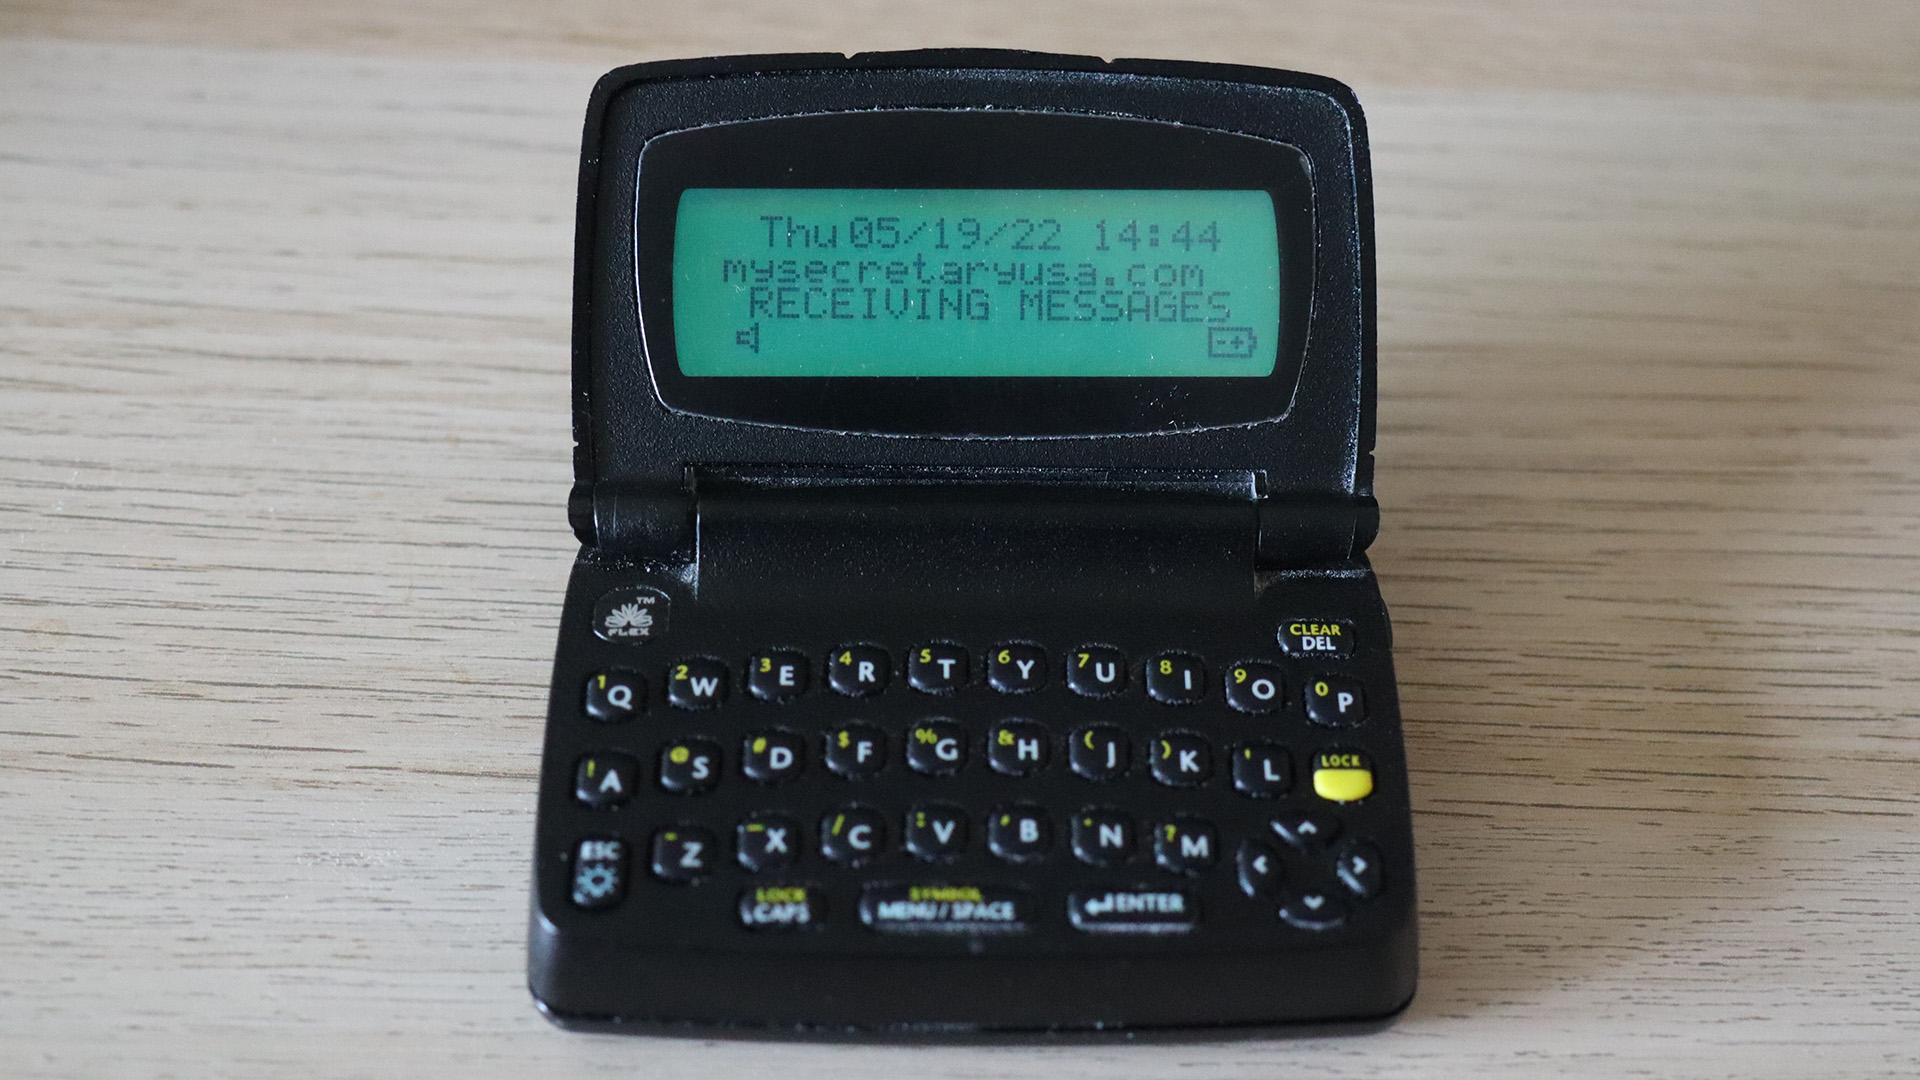 My Motorola T900 Talkabout Two-Way pager